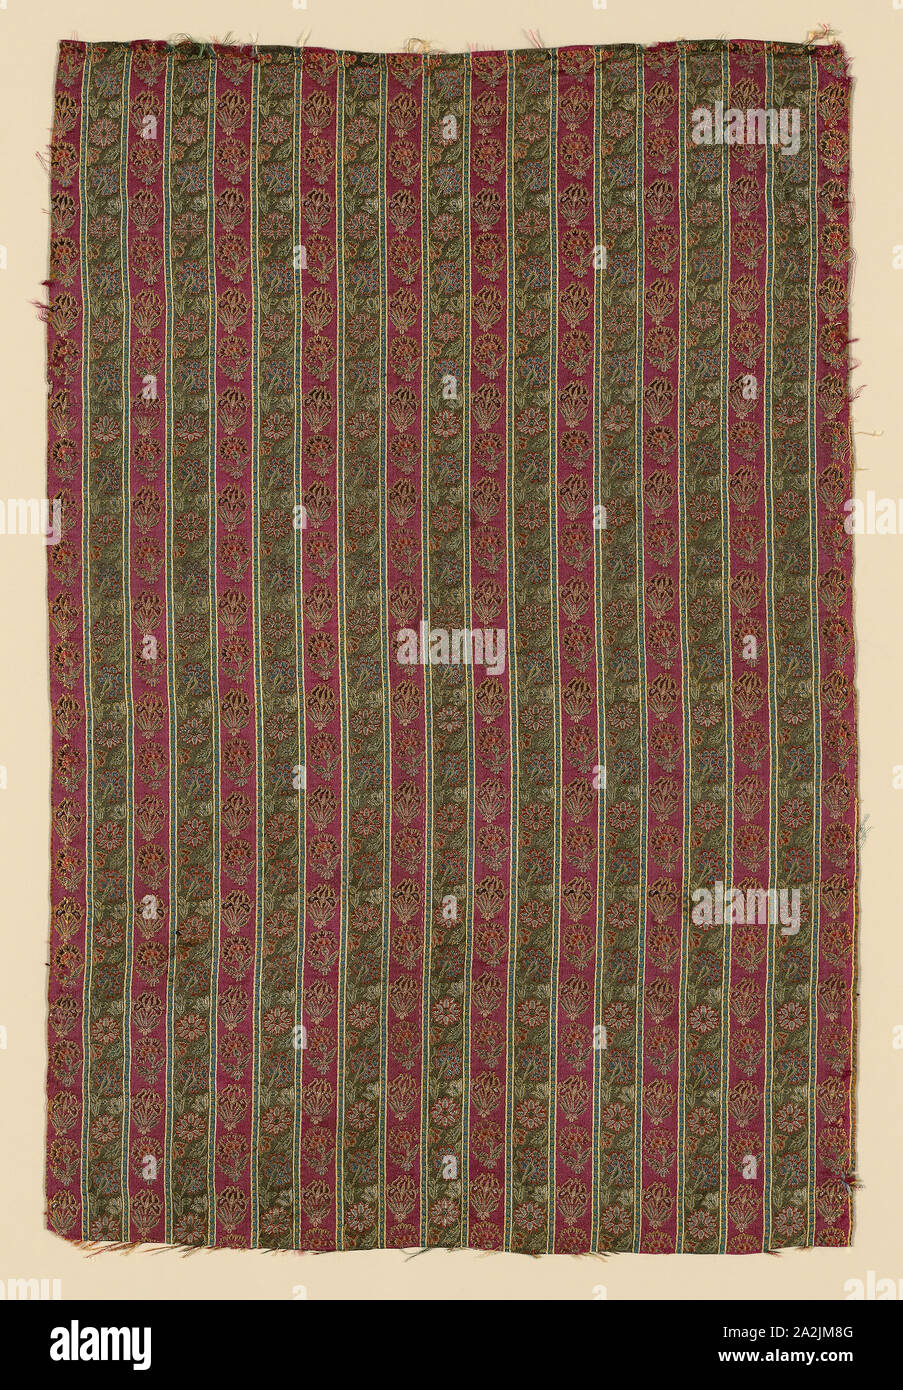 Dress Fabric, 18th century, Iran, Iran, Silk, satin weave with with weft-faced patterning, 51.5 × 34.3 cm (20 1/4 × 13 1/2 in Stock Photo